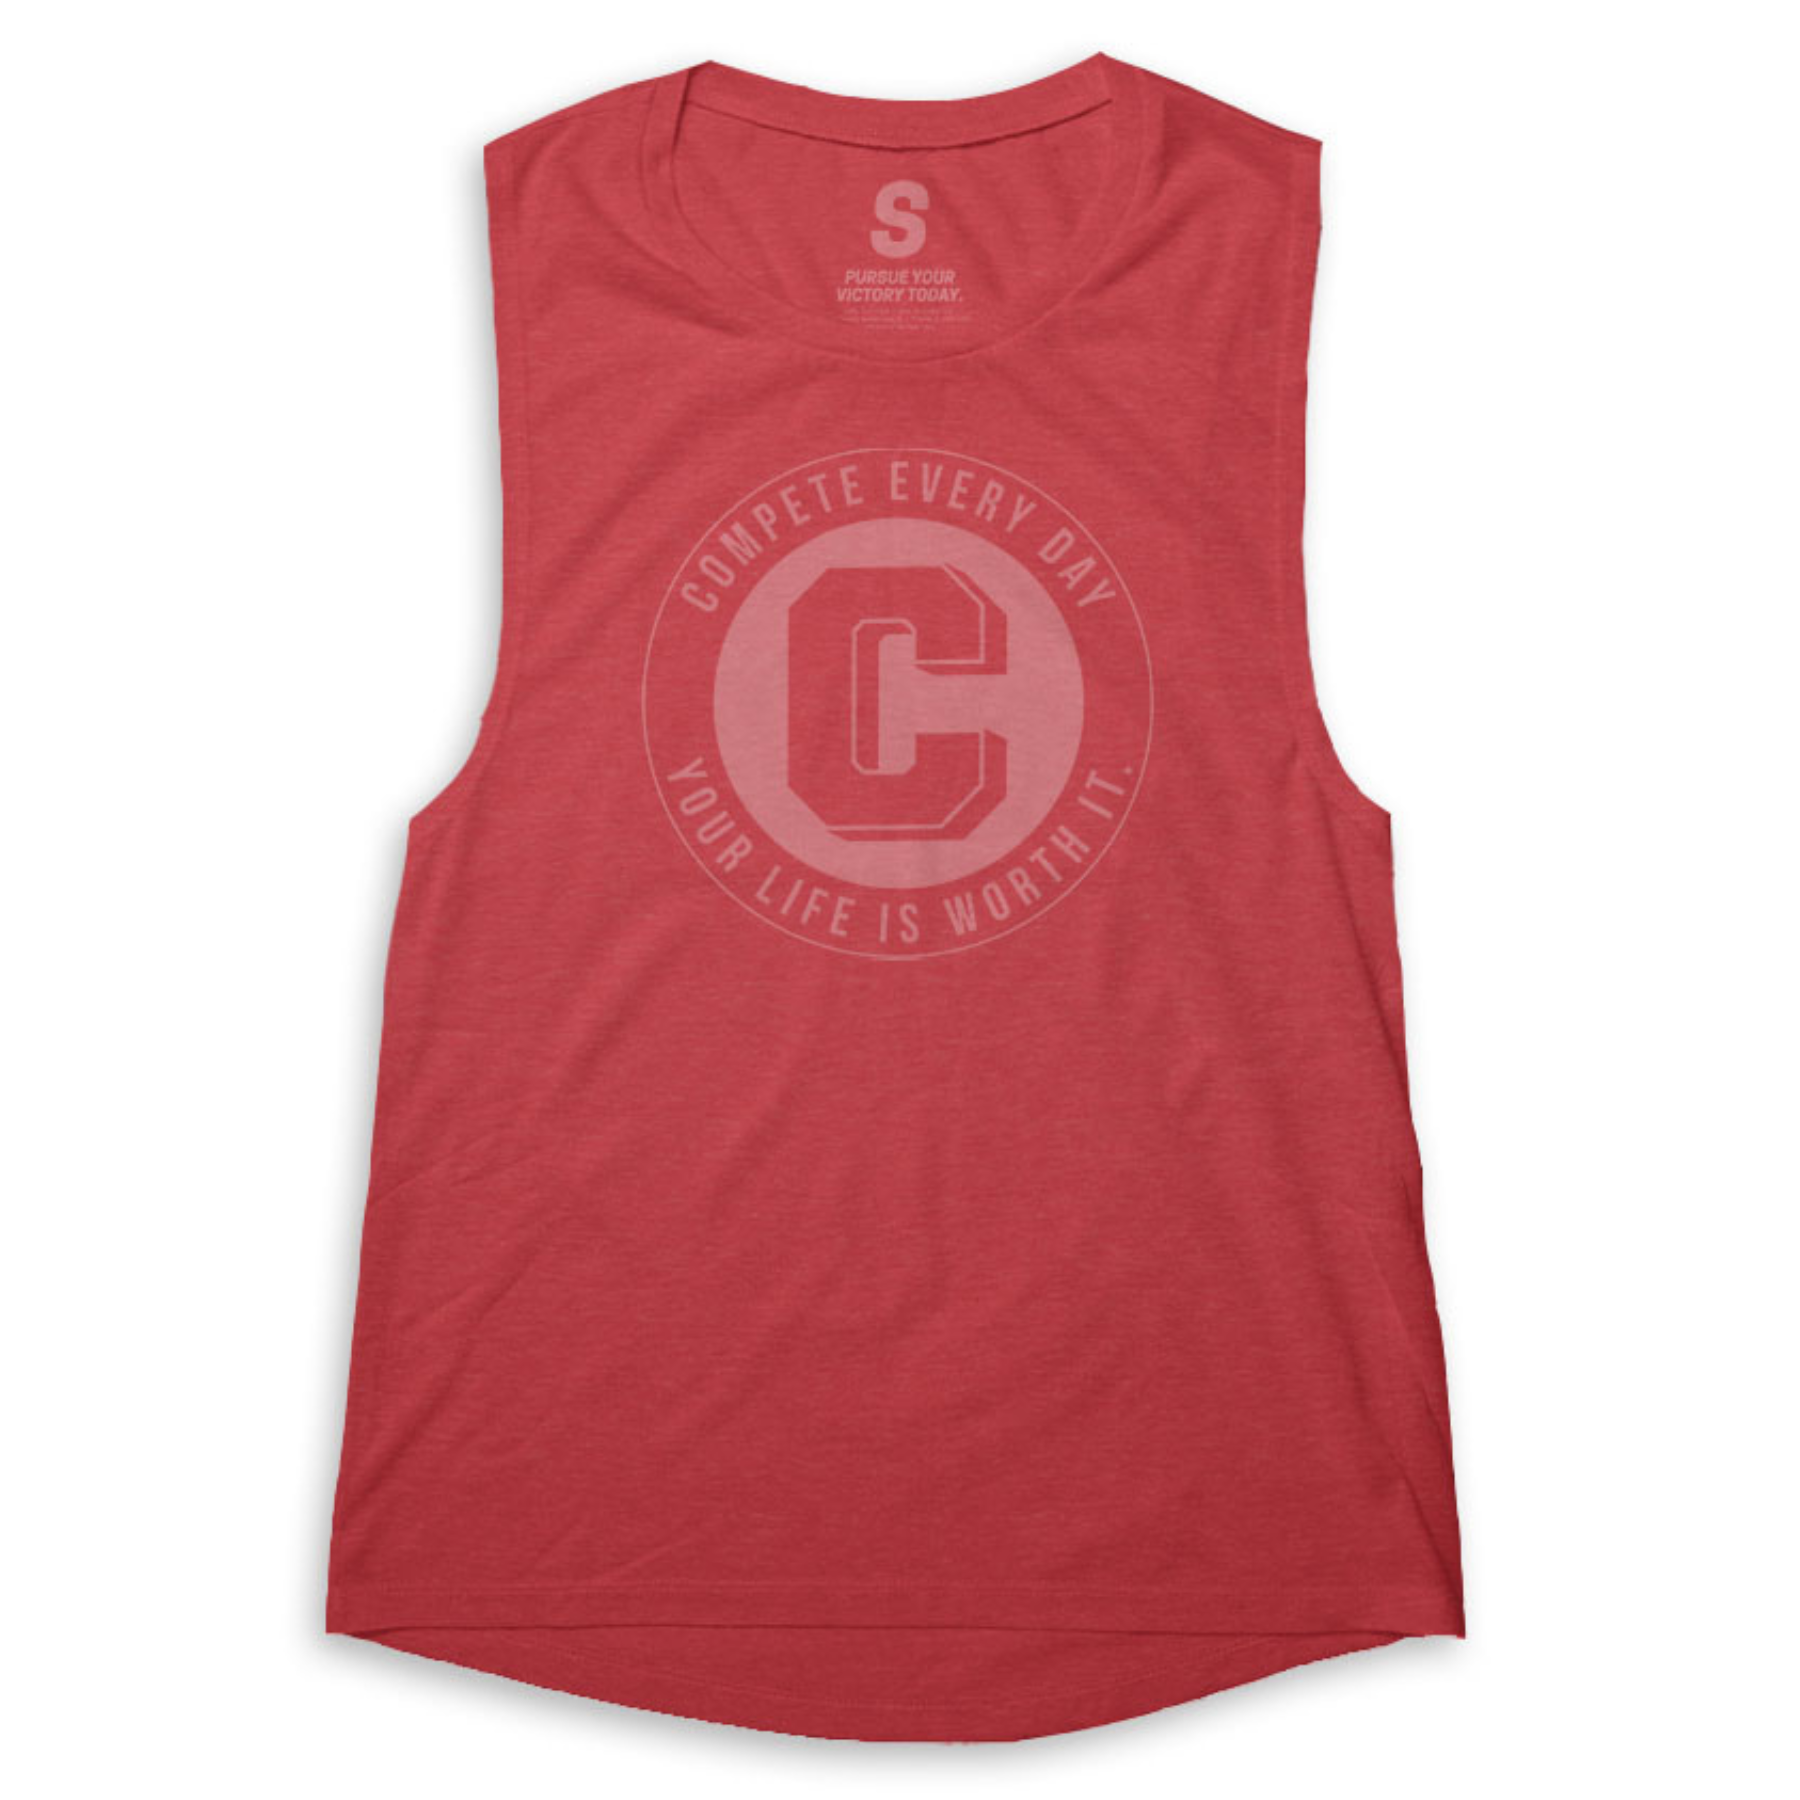 Keys to Life Women's Muscle Tanktop Red